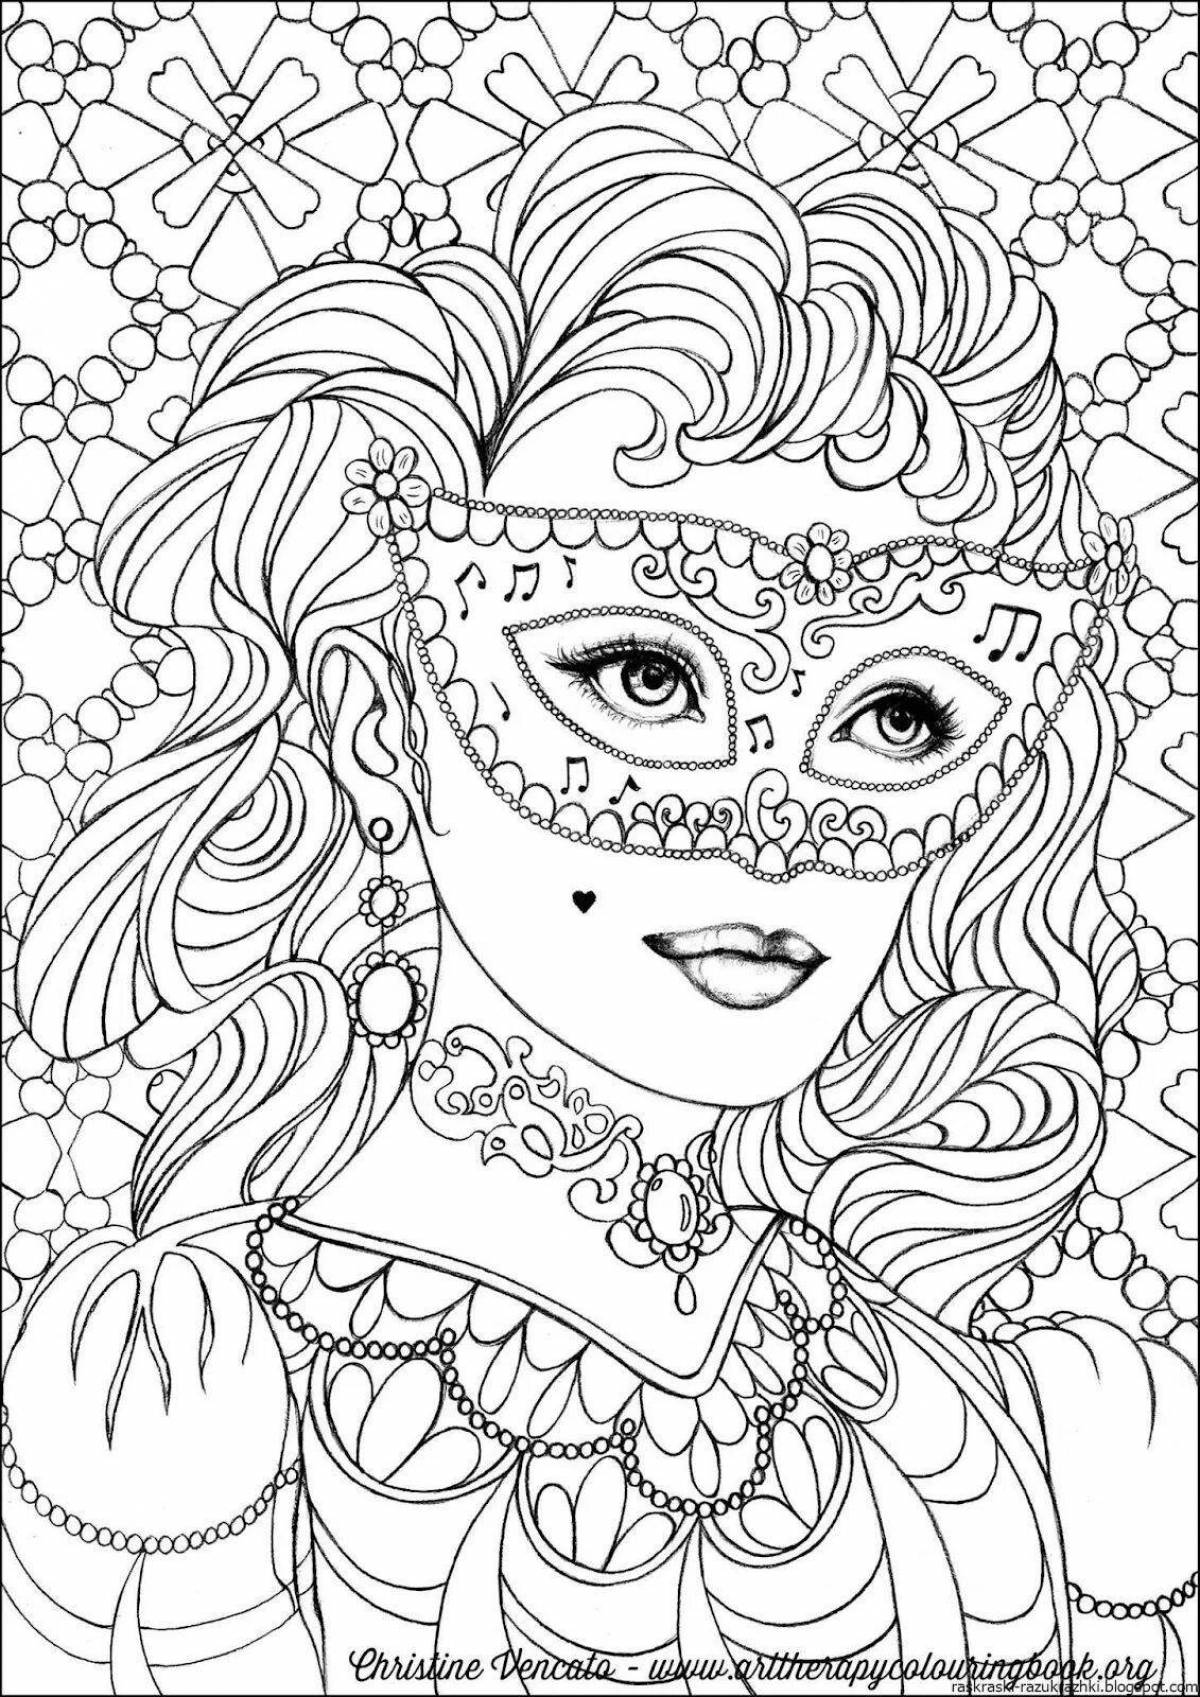 Fairytale coloring book for girls 9 years old